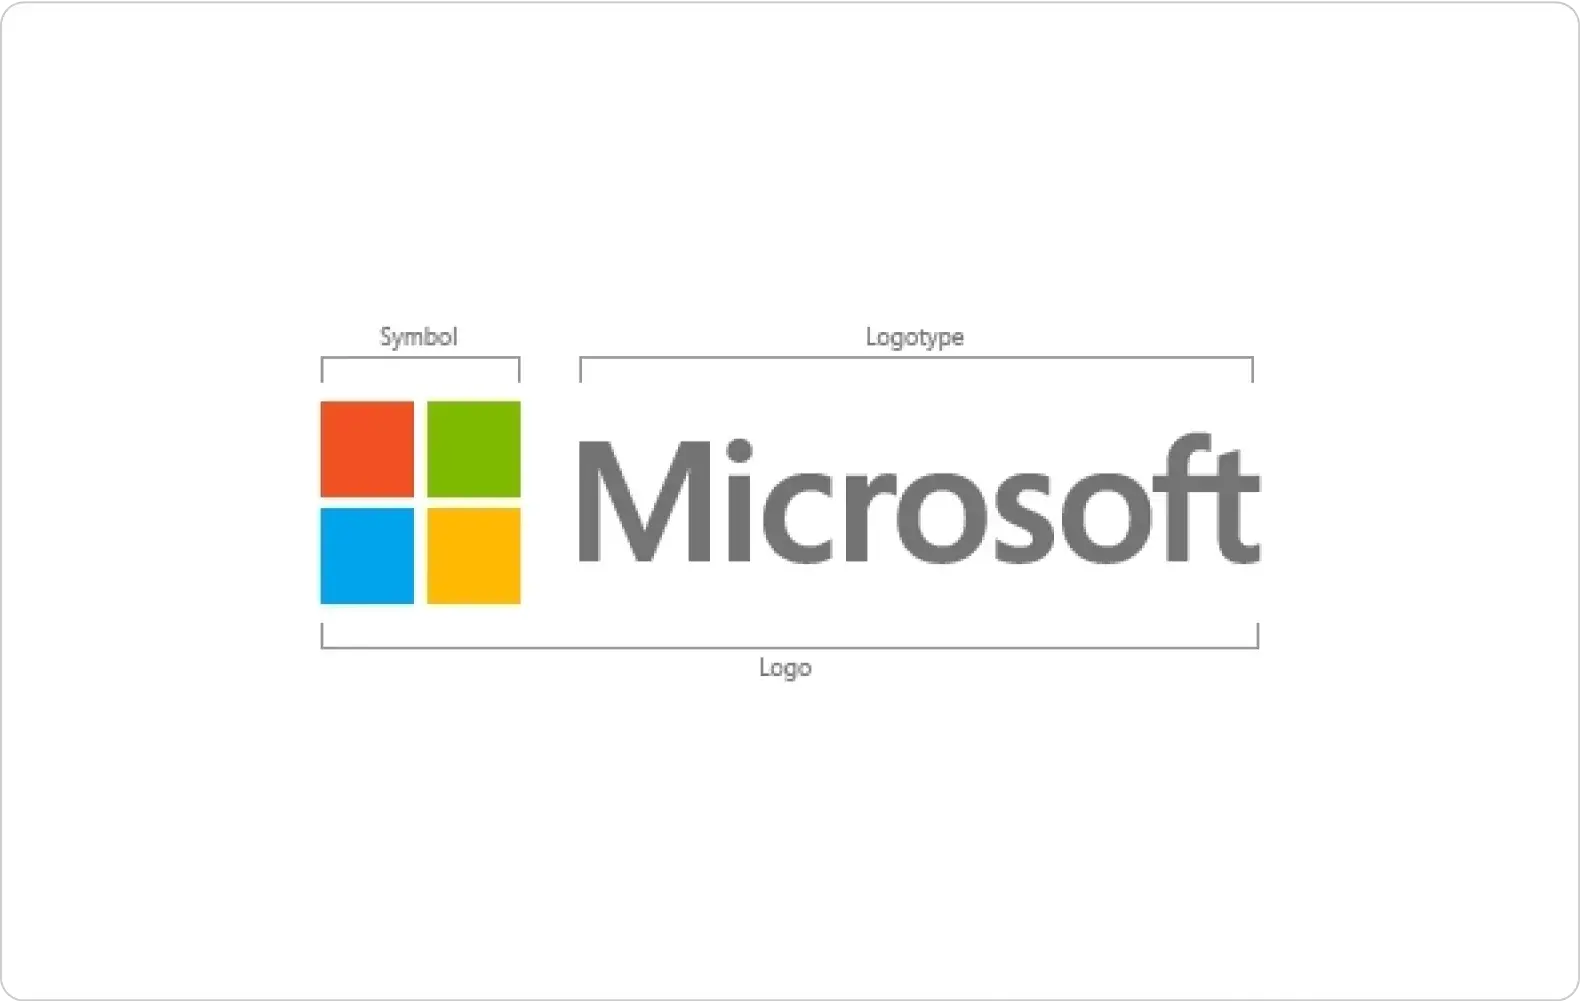 Image of the Microsoft logo with information about the different elements of a logo.